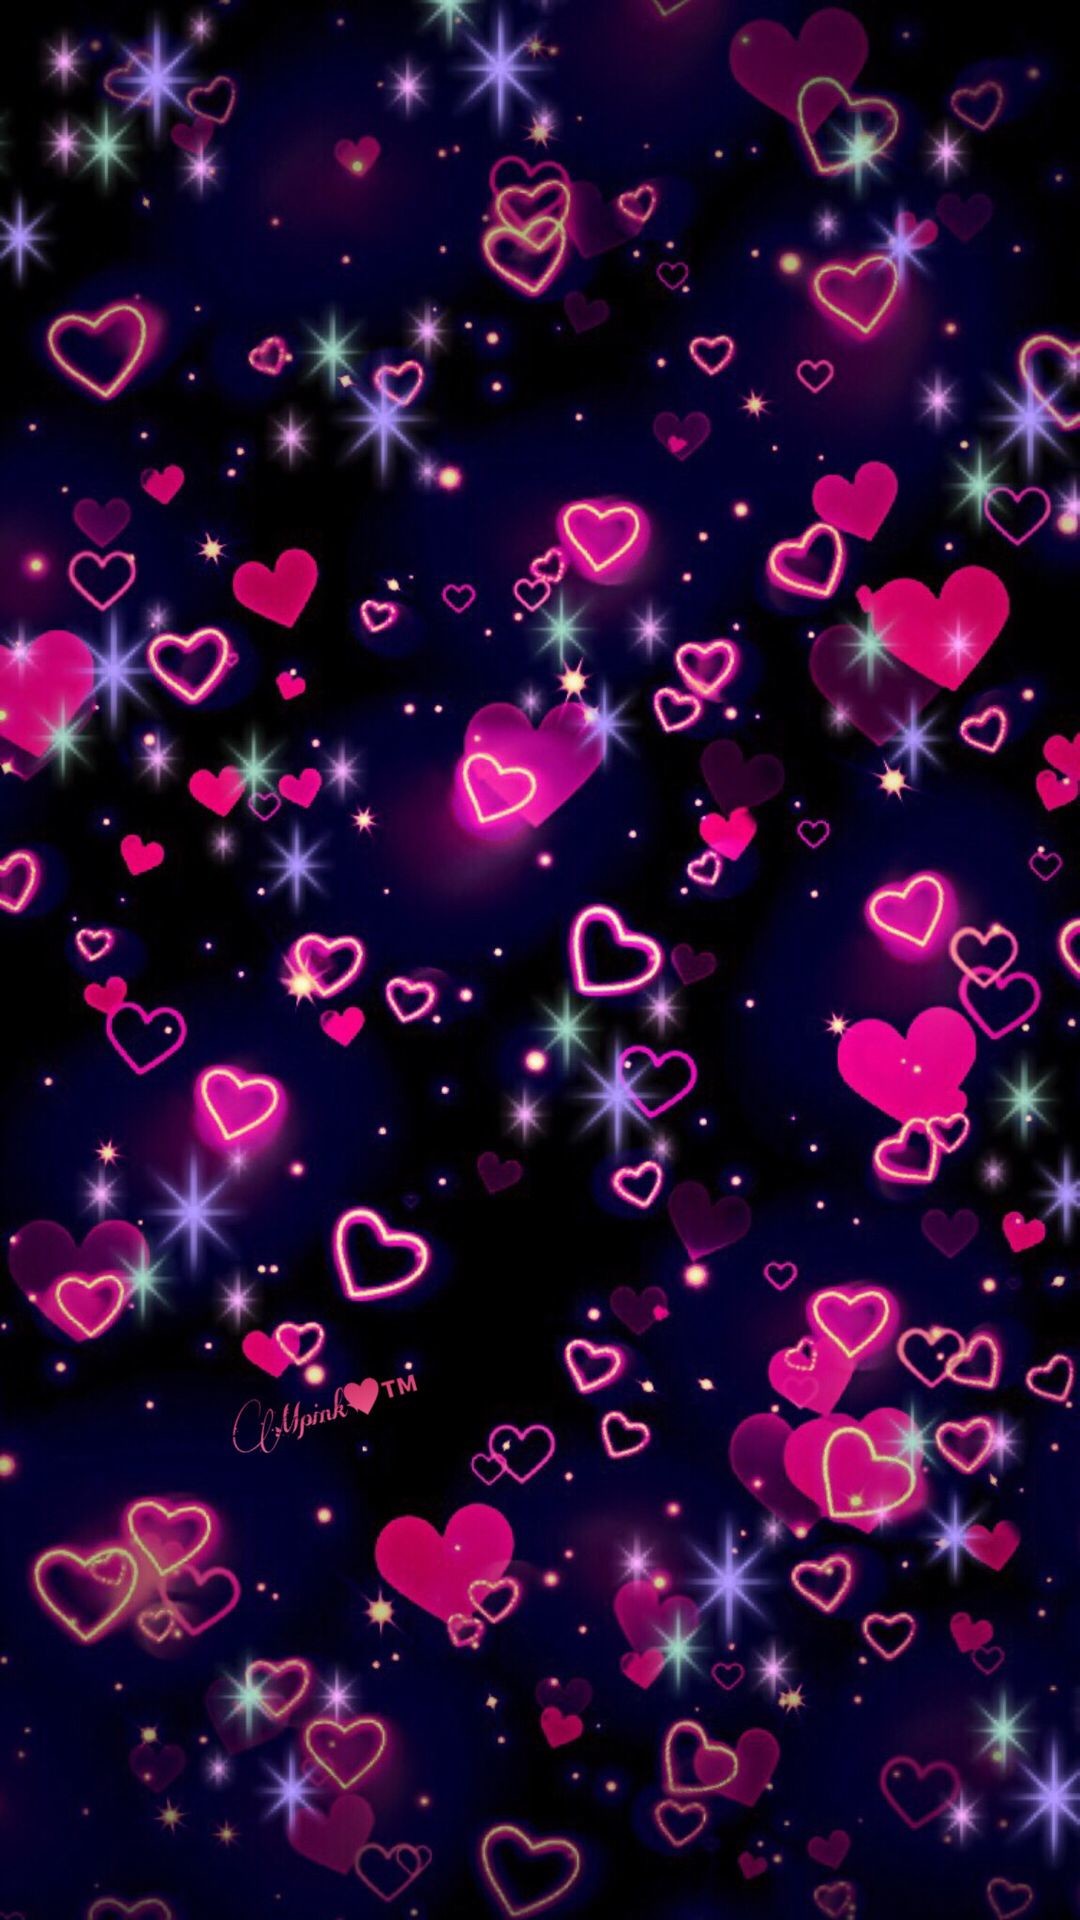 Cute Heart Aesthetic Wallpaper and HD Background free download on PicGaGa